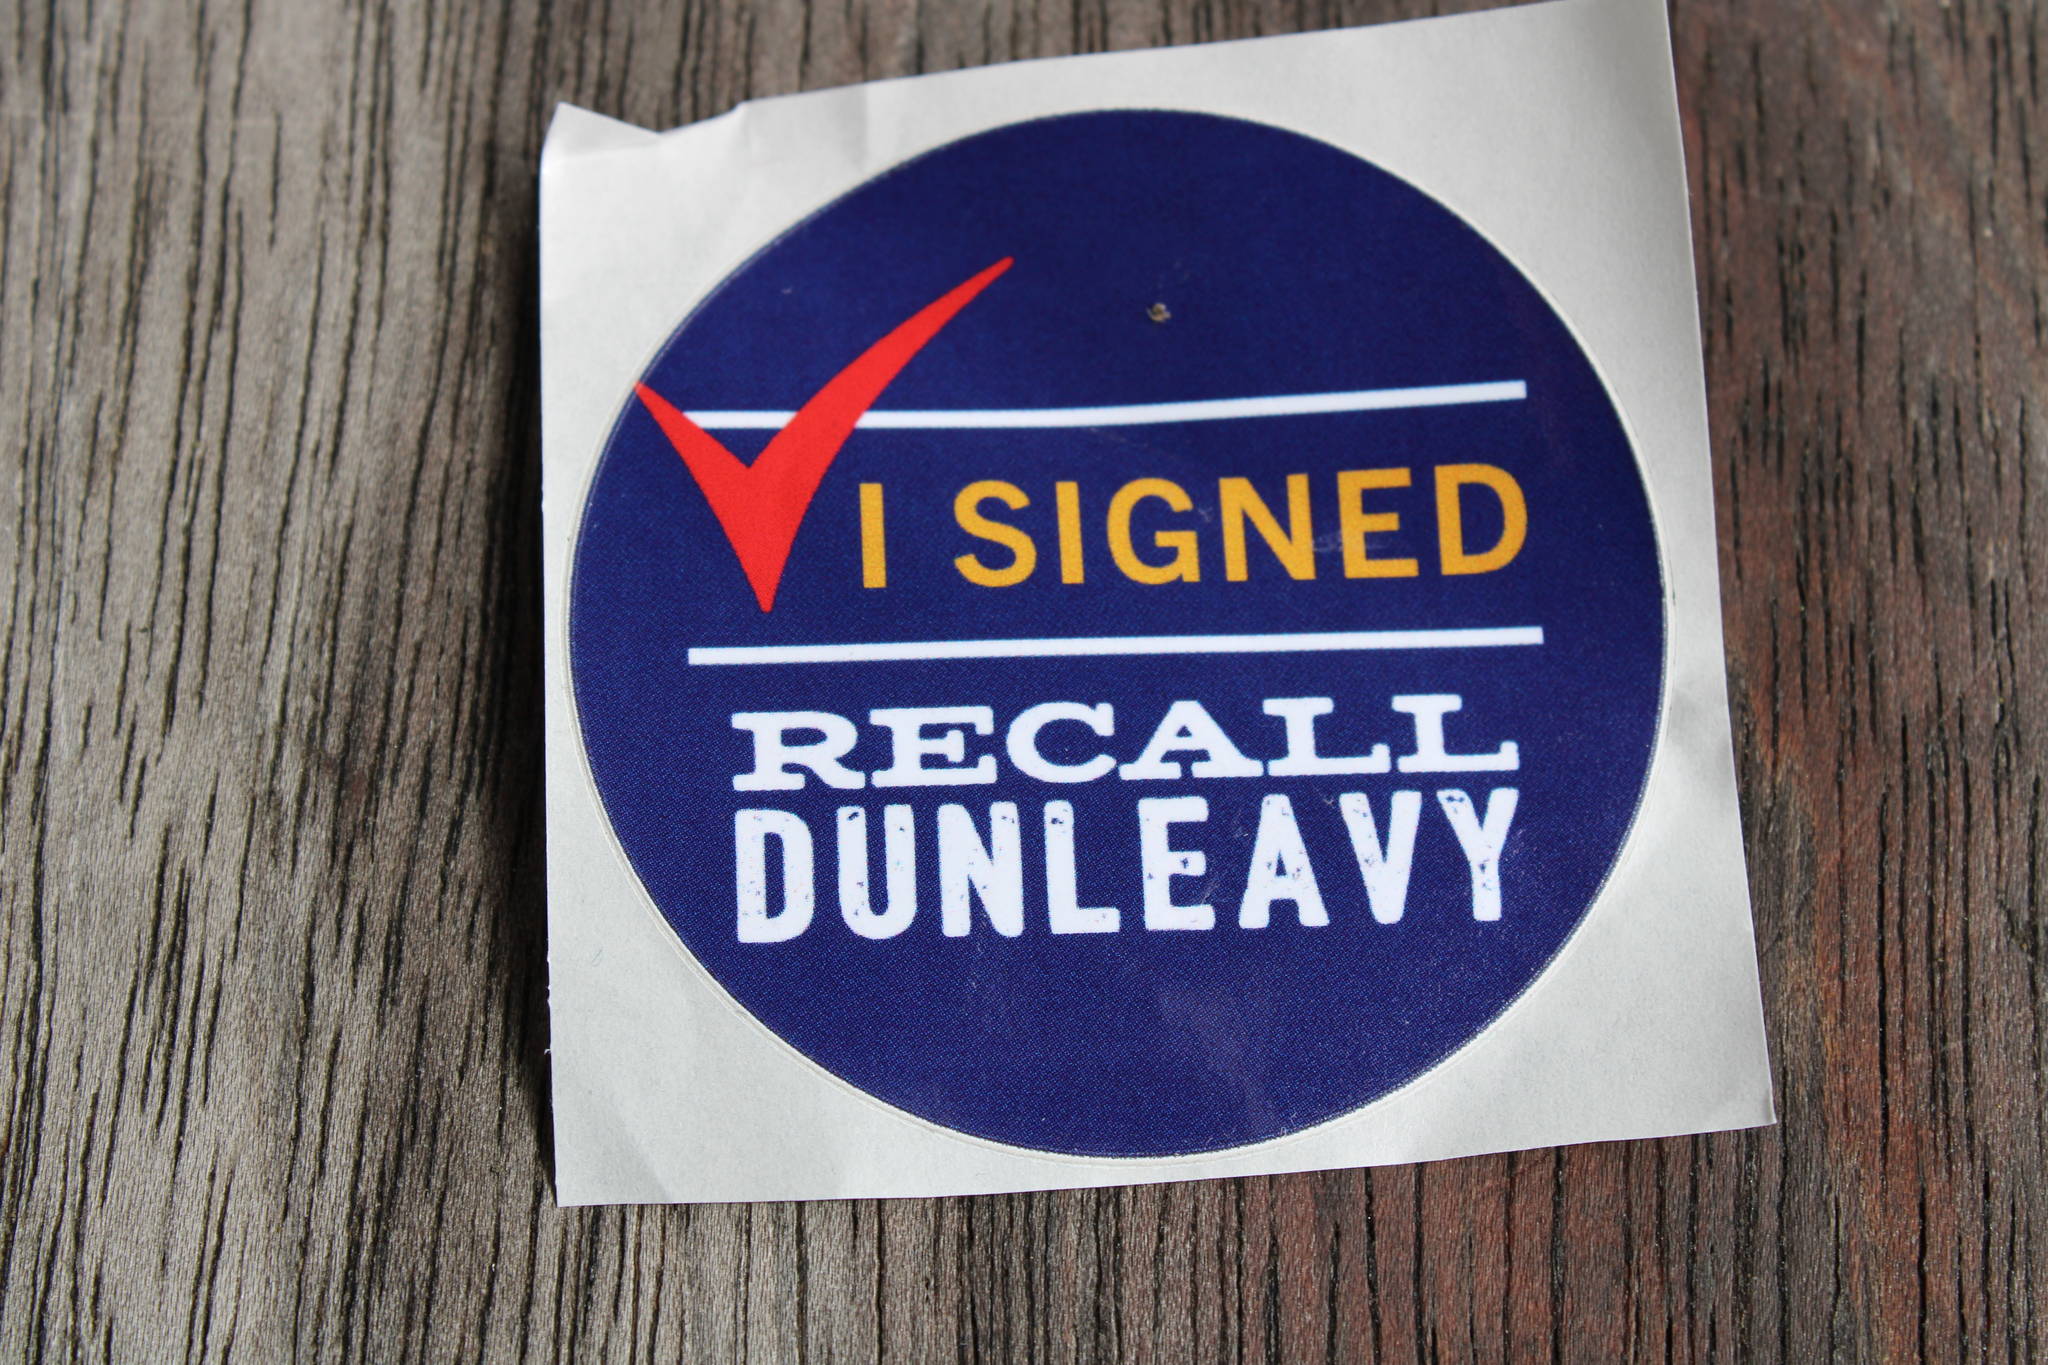 Members of the Recall Dunleavy group are close to achieving their goal for signatures, with only about 20,000 signatures remaining as of Jan. 19, 2021. (Ben Hohenstatt / Juneau Empire File)